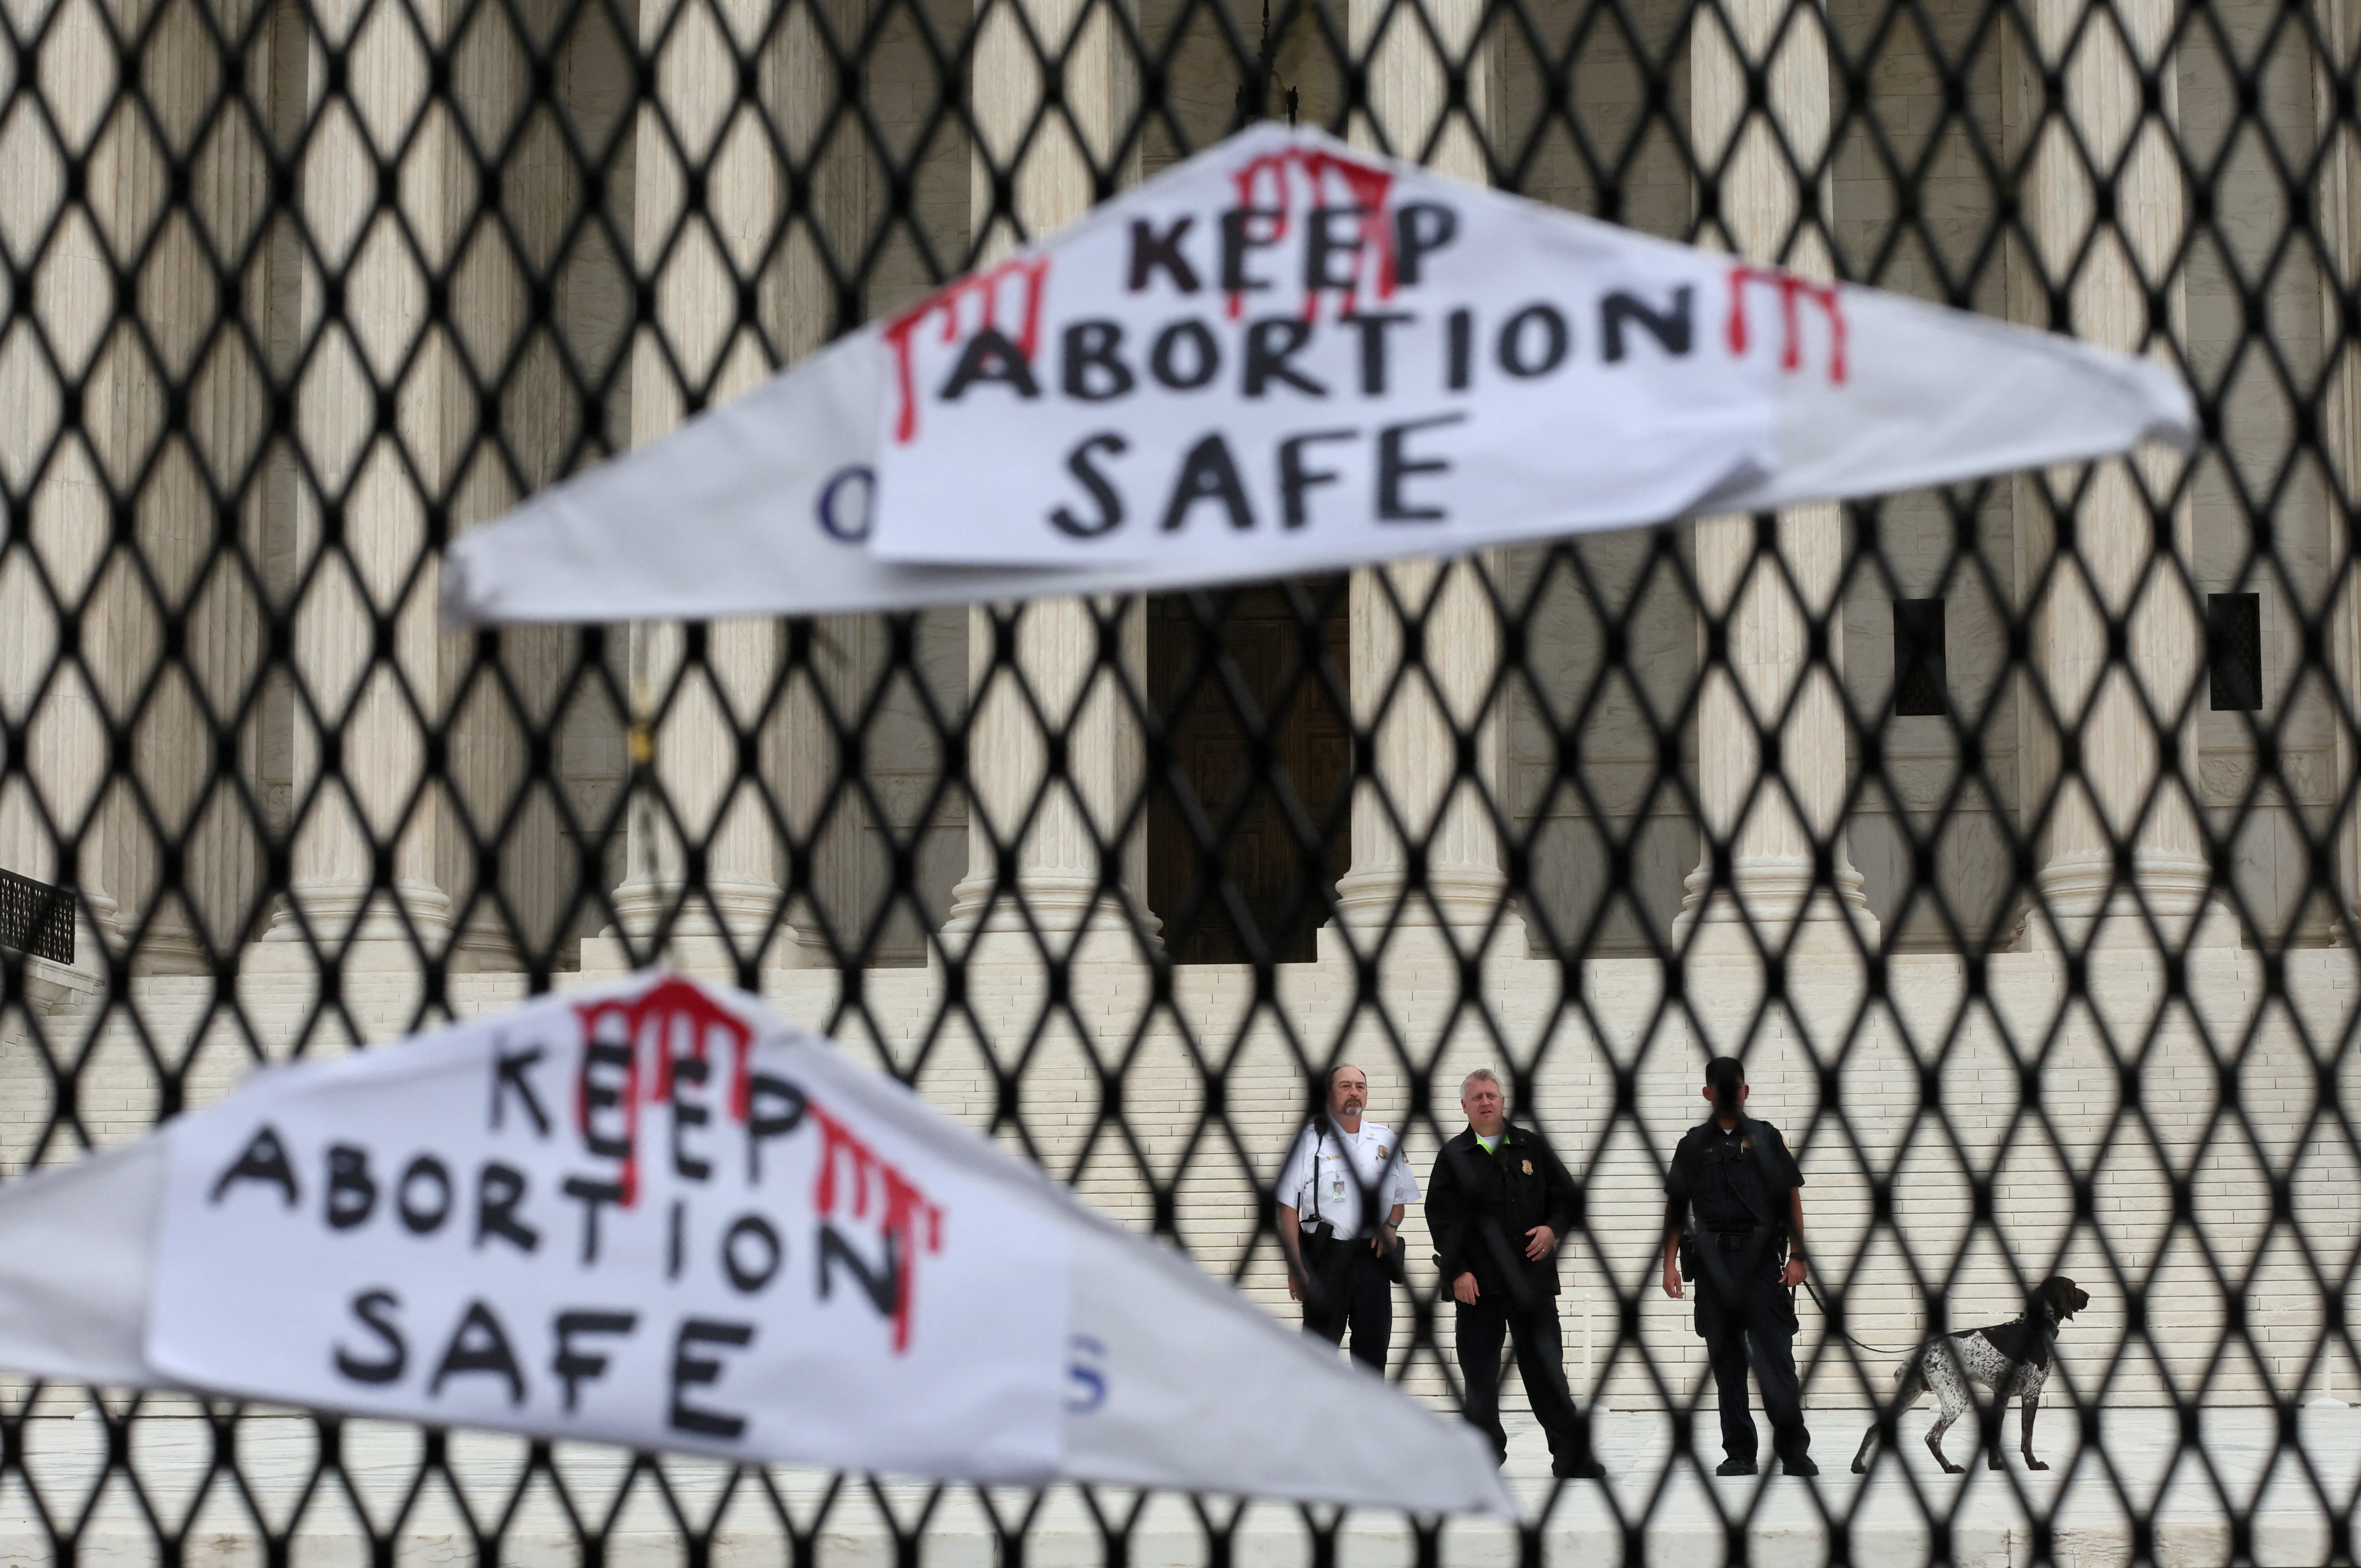 People rally for abortion rights outside of the U.S. Supreme Court in Washington